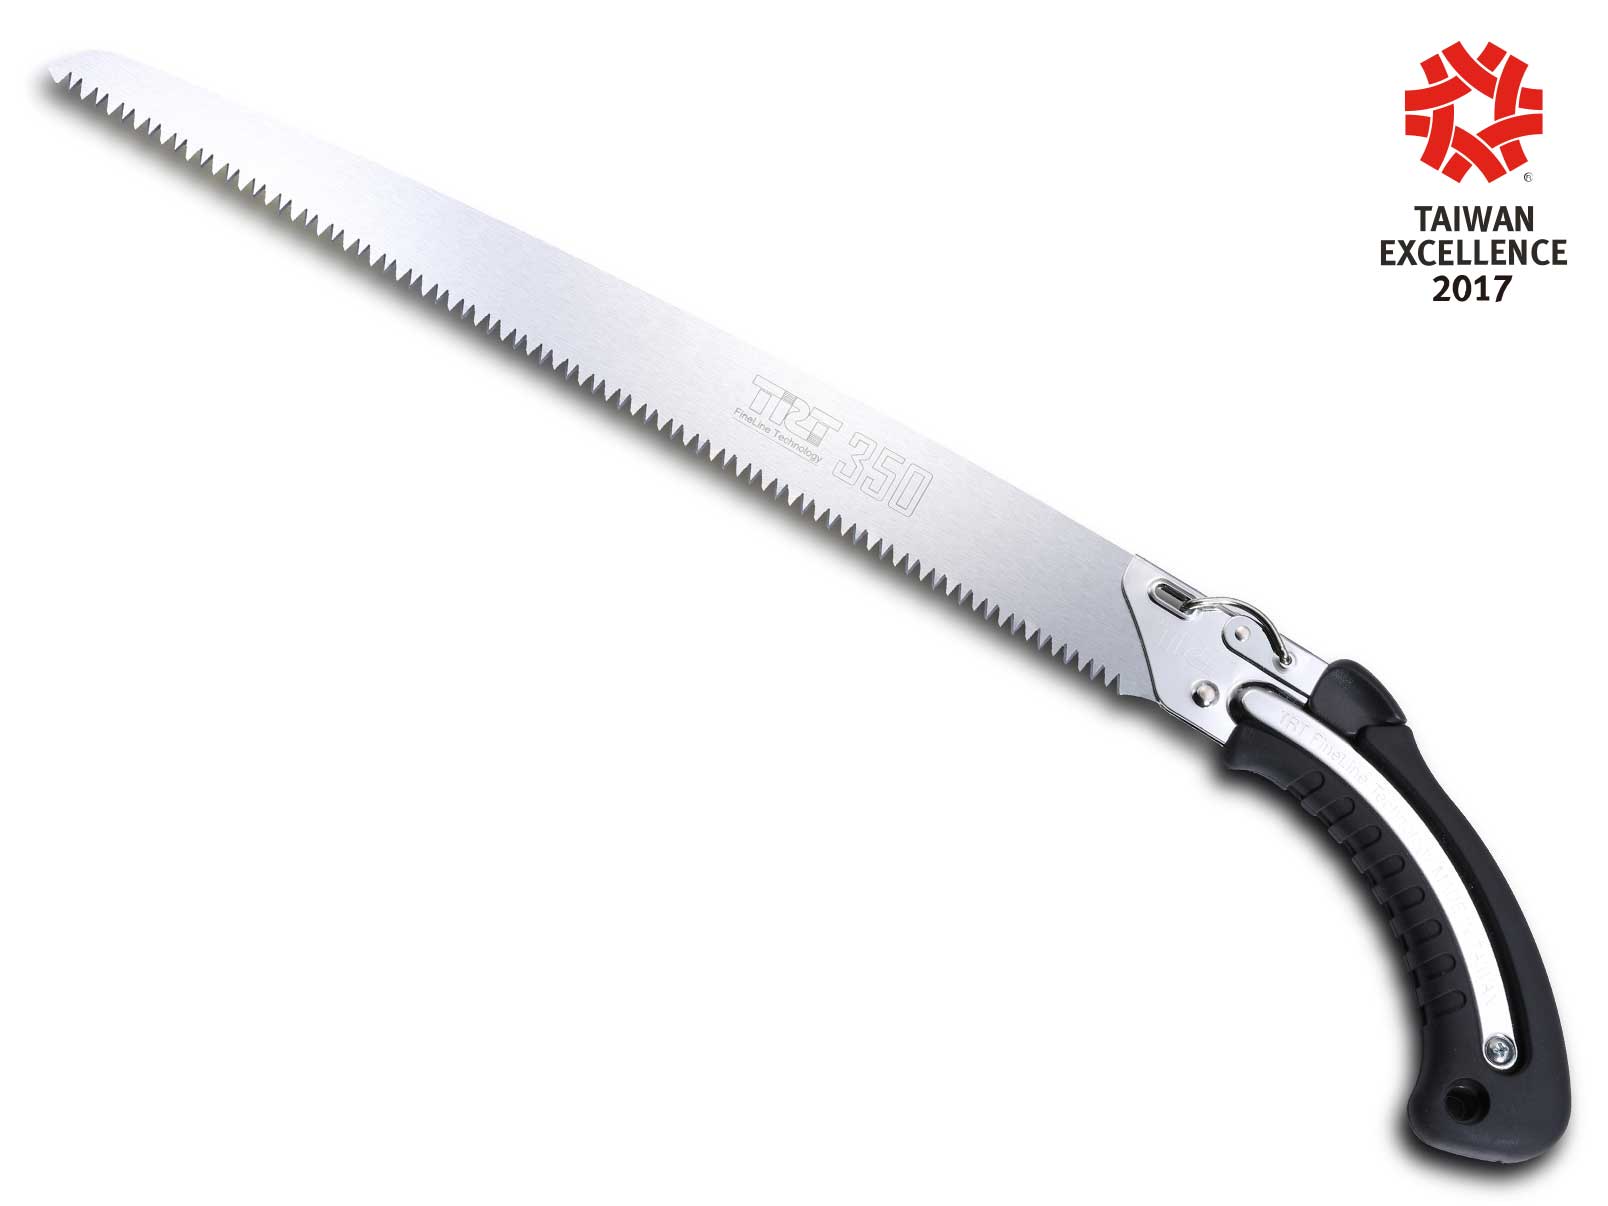 2017 Taiwan Excellence Award TRT ST Pruning Saw